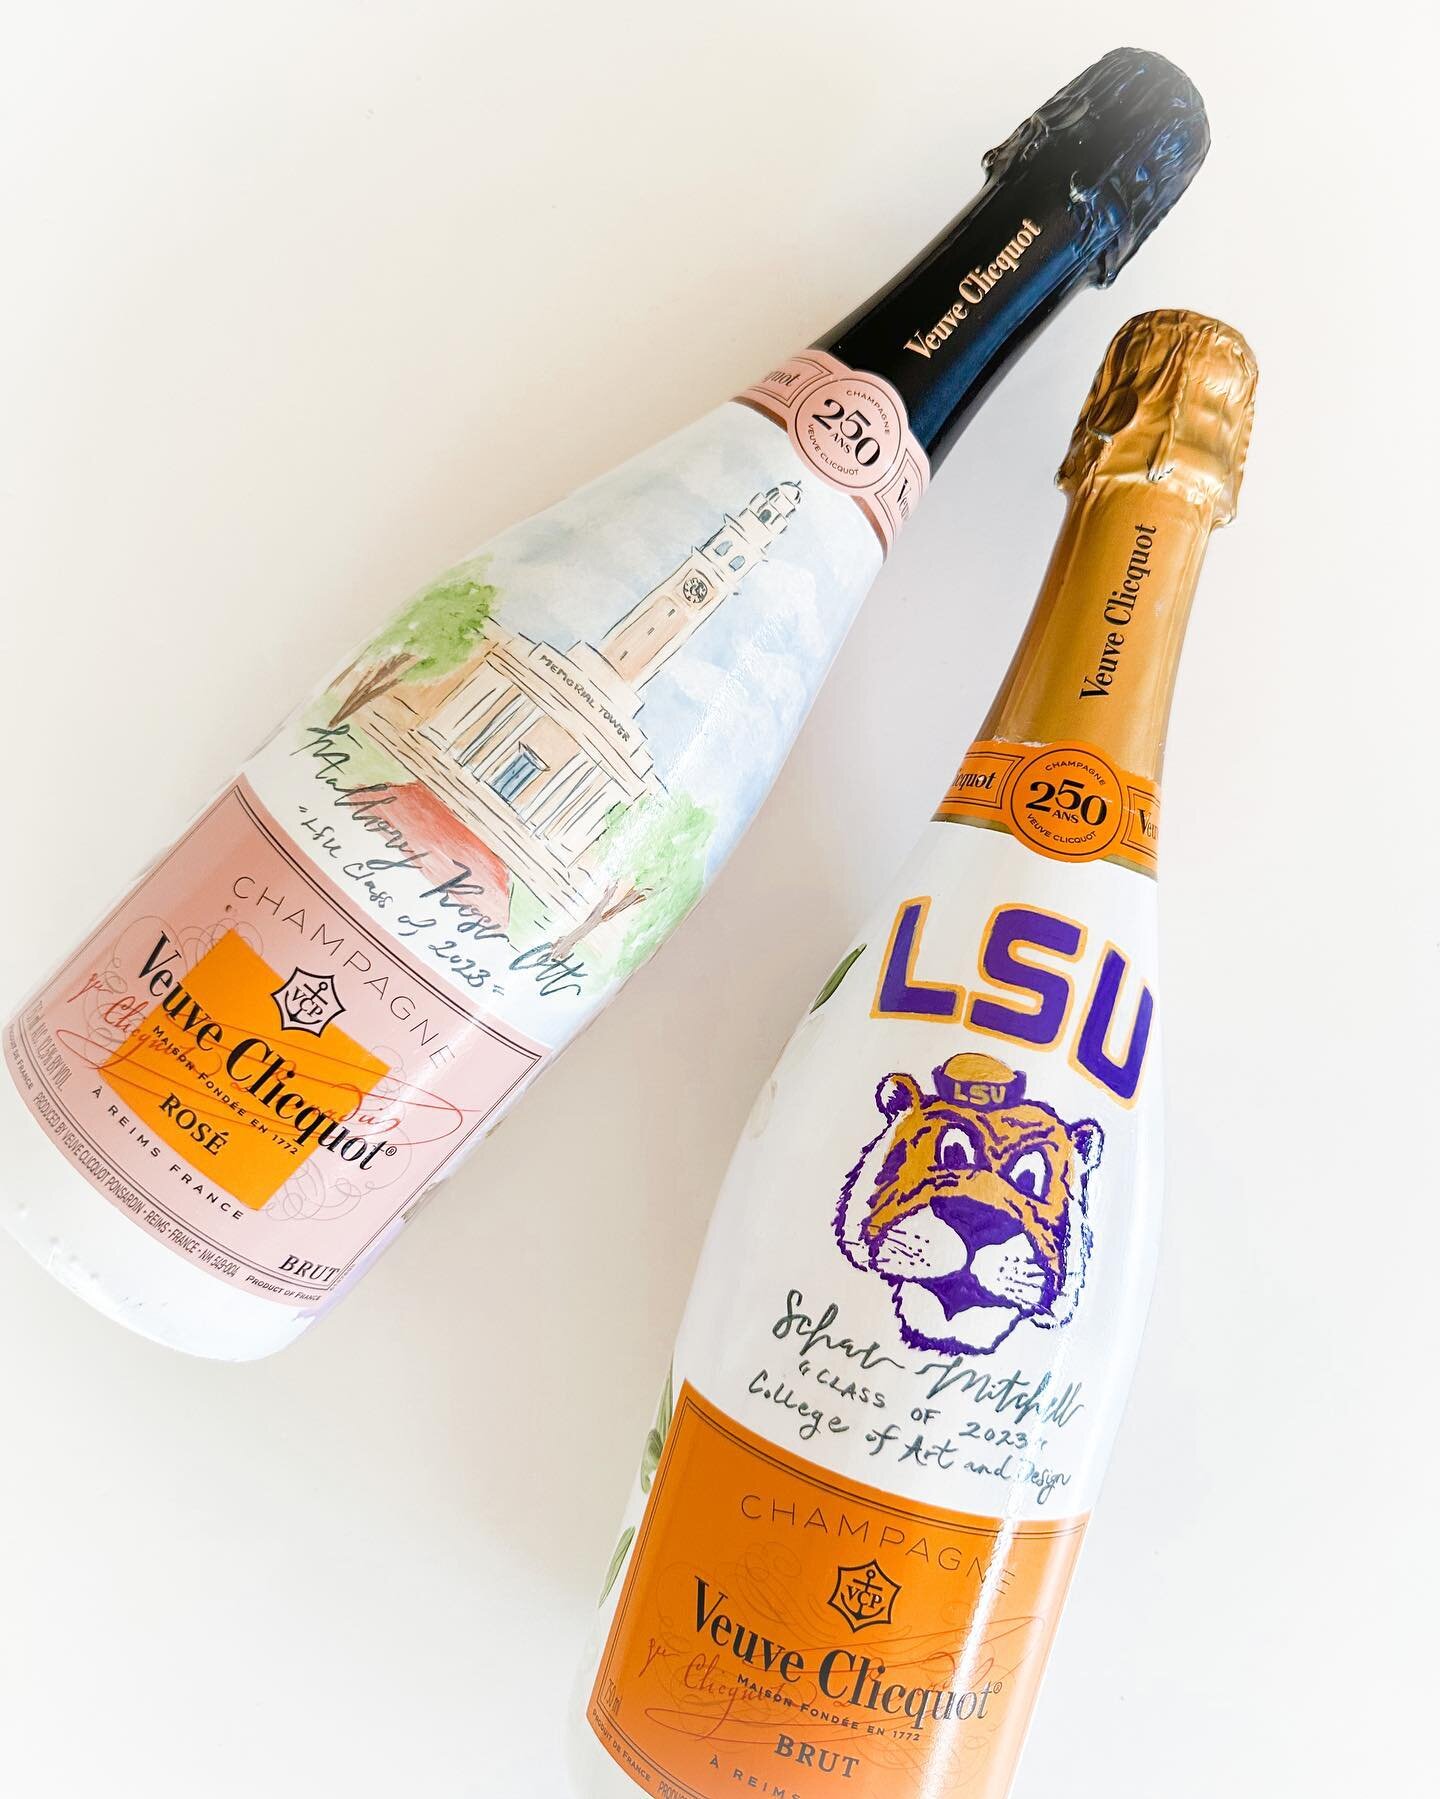 It&rsquo;s graduation weekend for my alma mater, @lsu !! Congrats to all the grads this weekend 💜💛

#paintedbottles #paintedchampagnebottle #graduation #graduationgift #wedding #weddingseason #weddinginspiration #customgifts #customartwork #localar